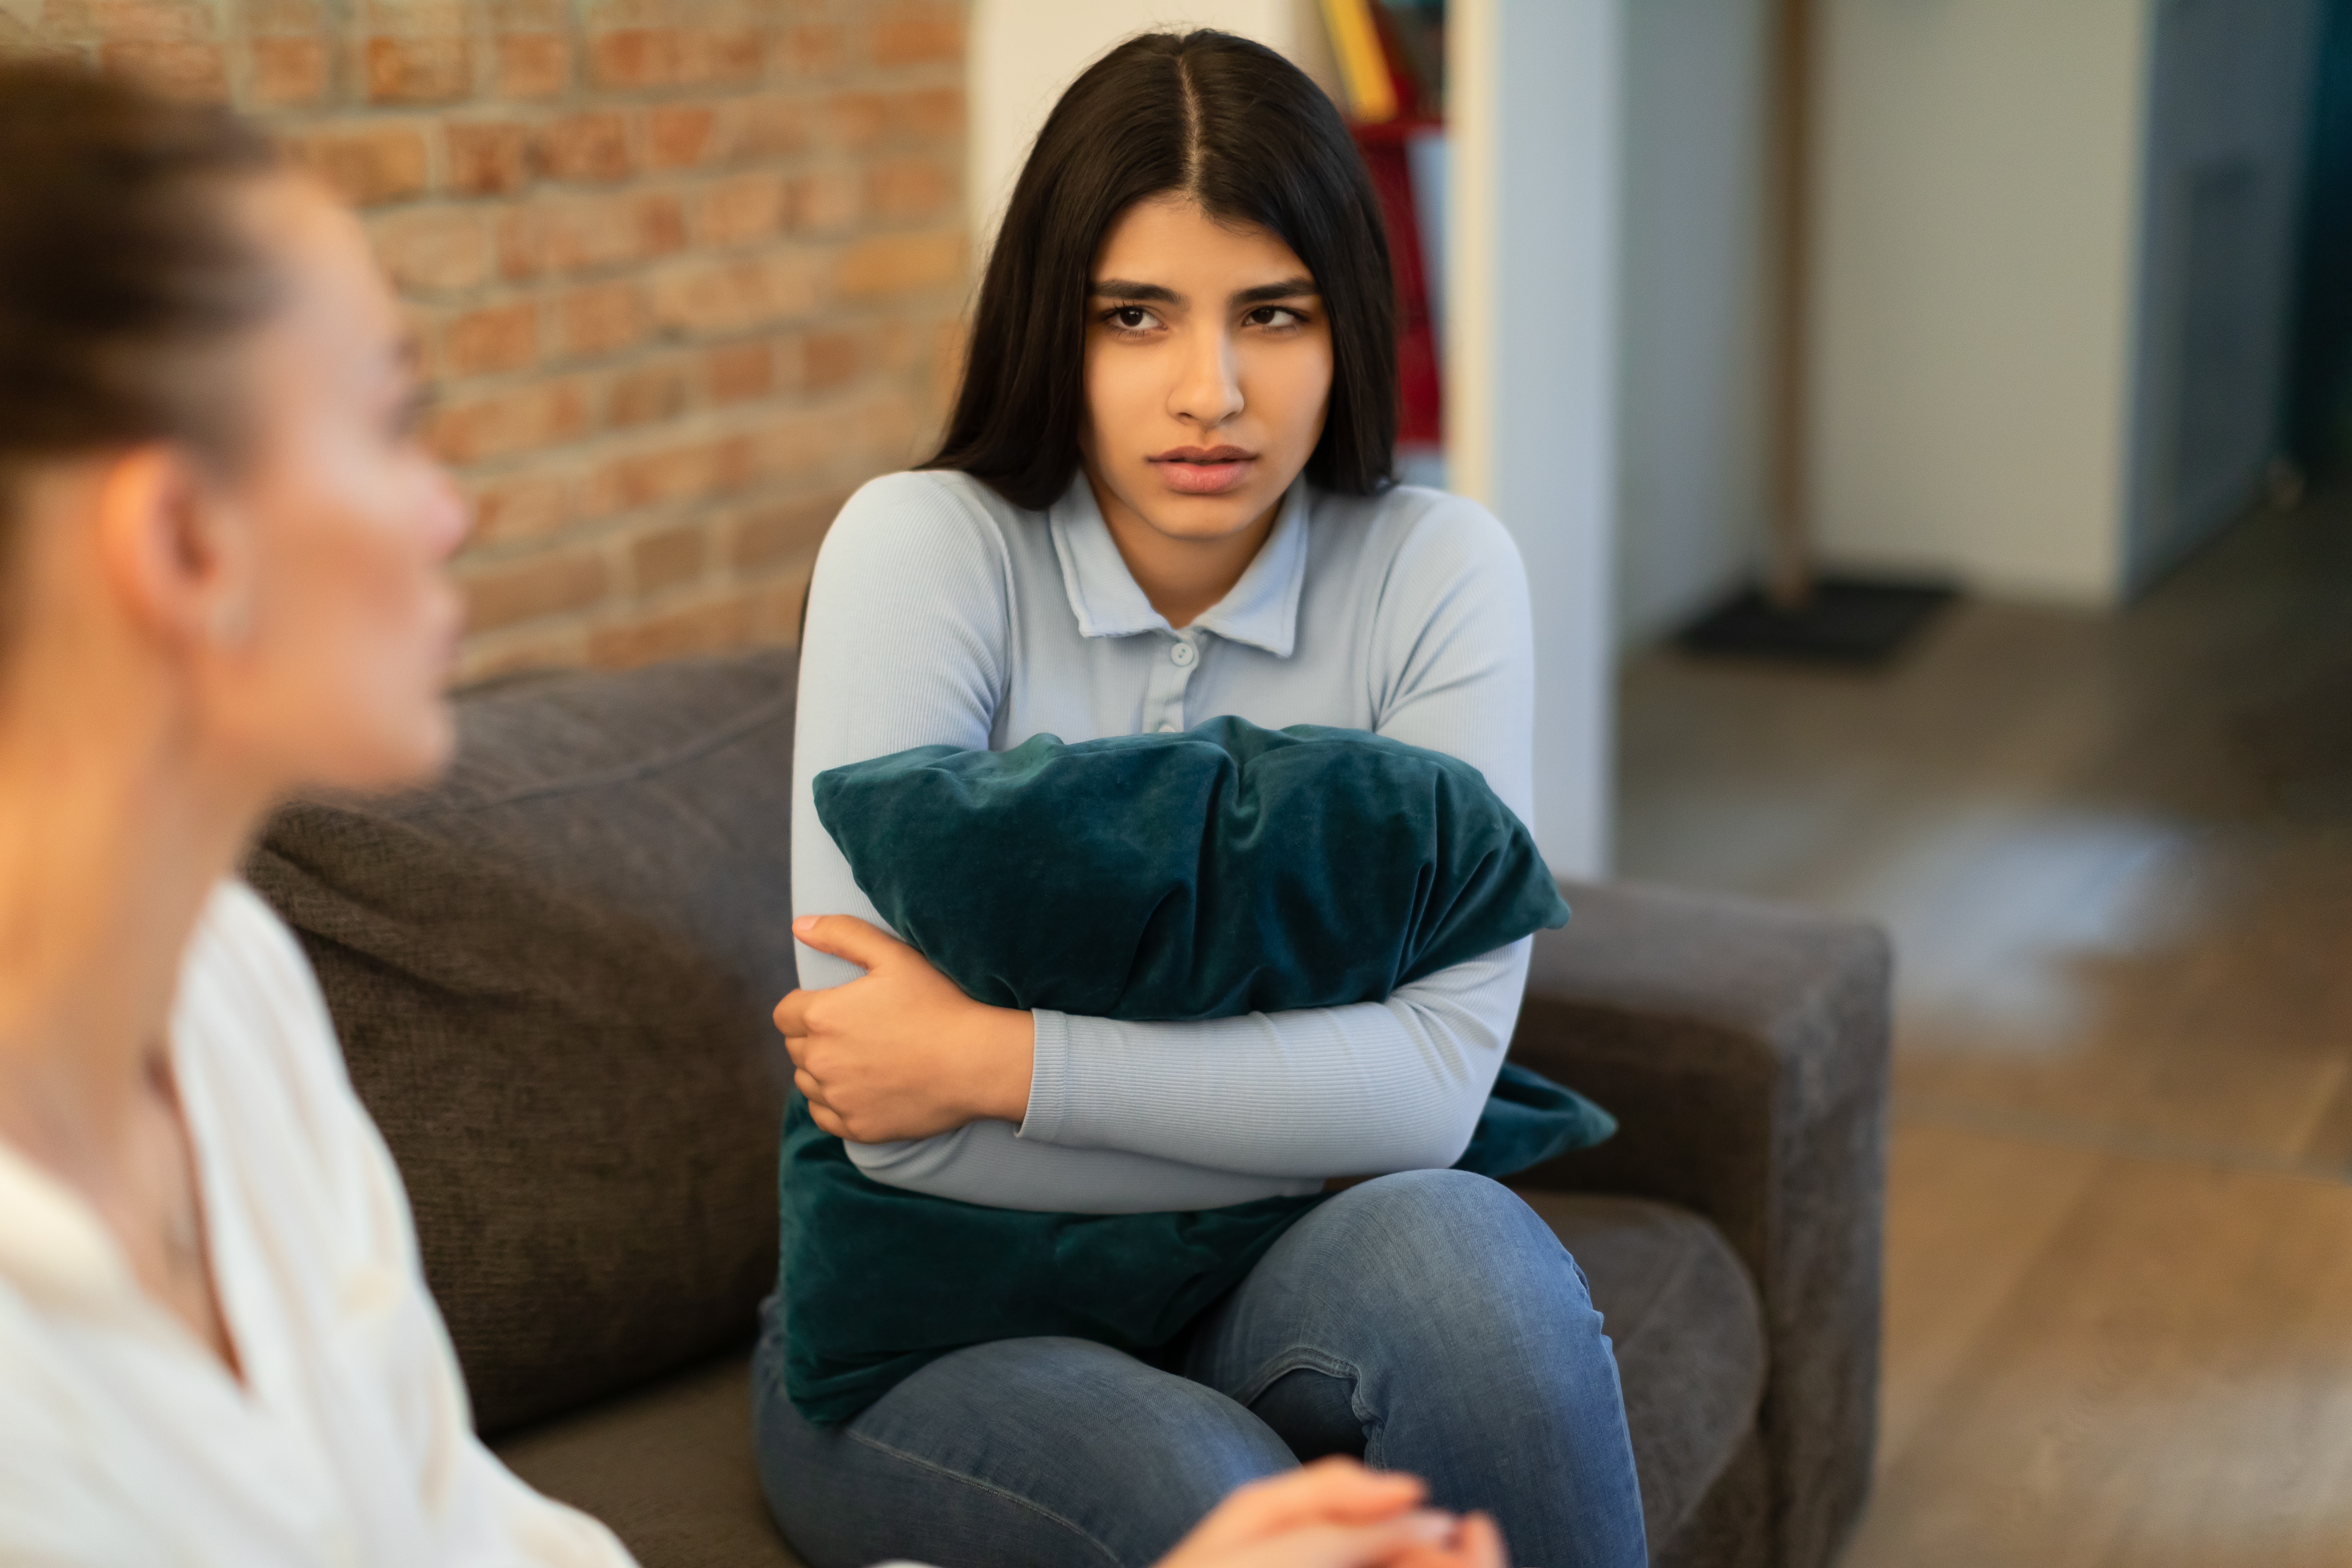 A woman has a serious conversation with a teenage girl | Source: Shutterstock